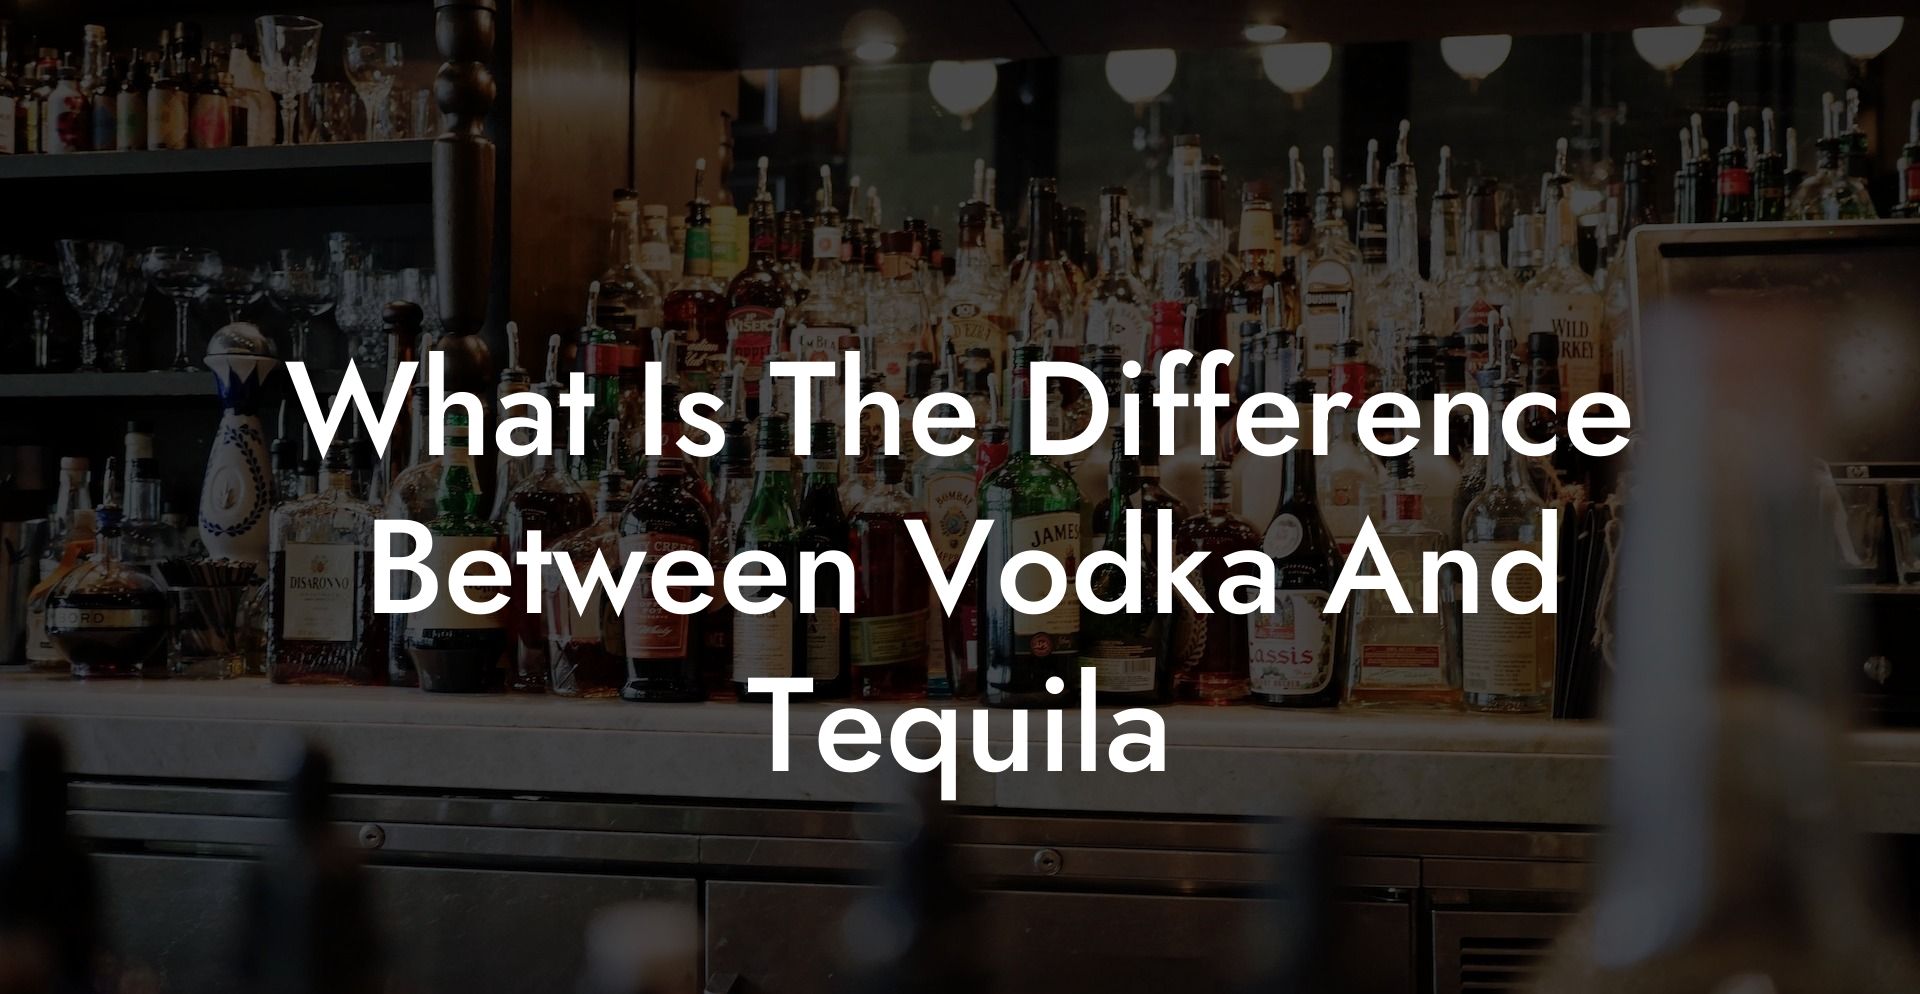 What Is The Difference Between Vodka And Tequila